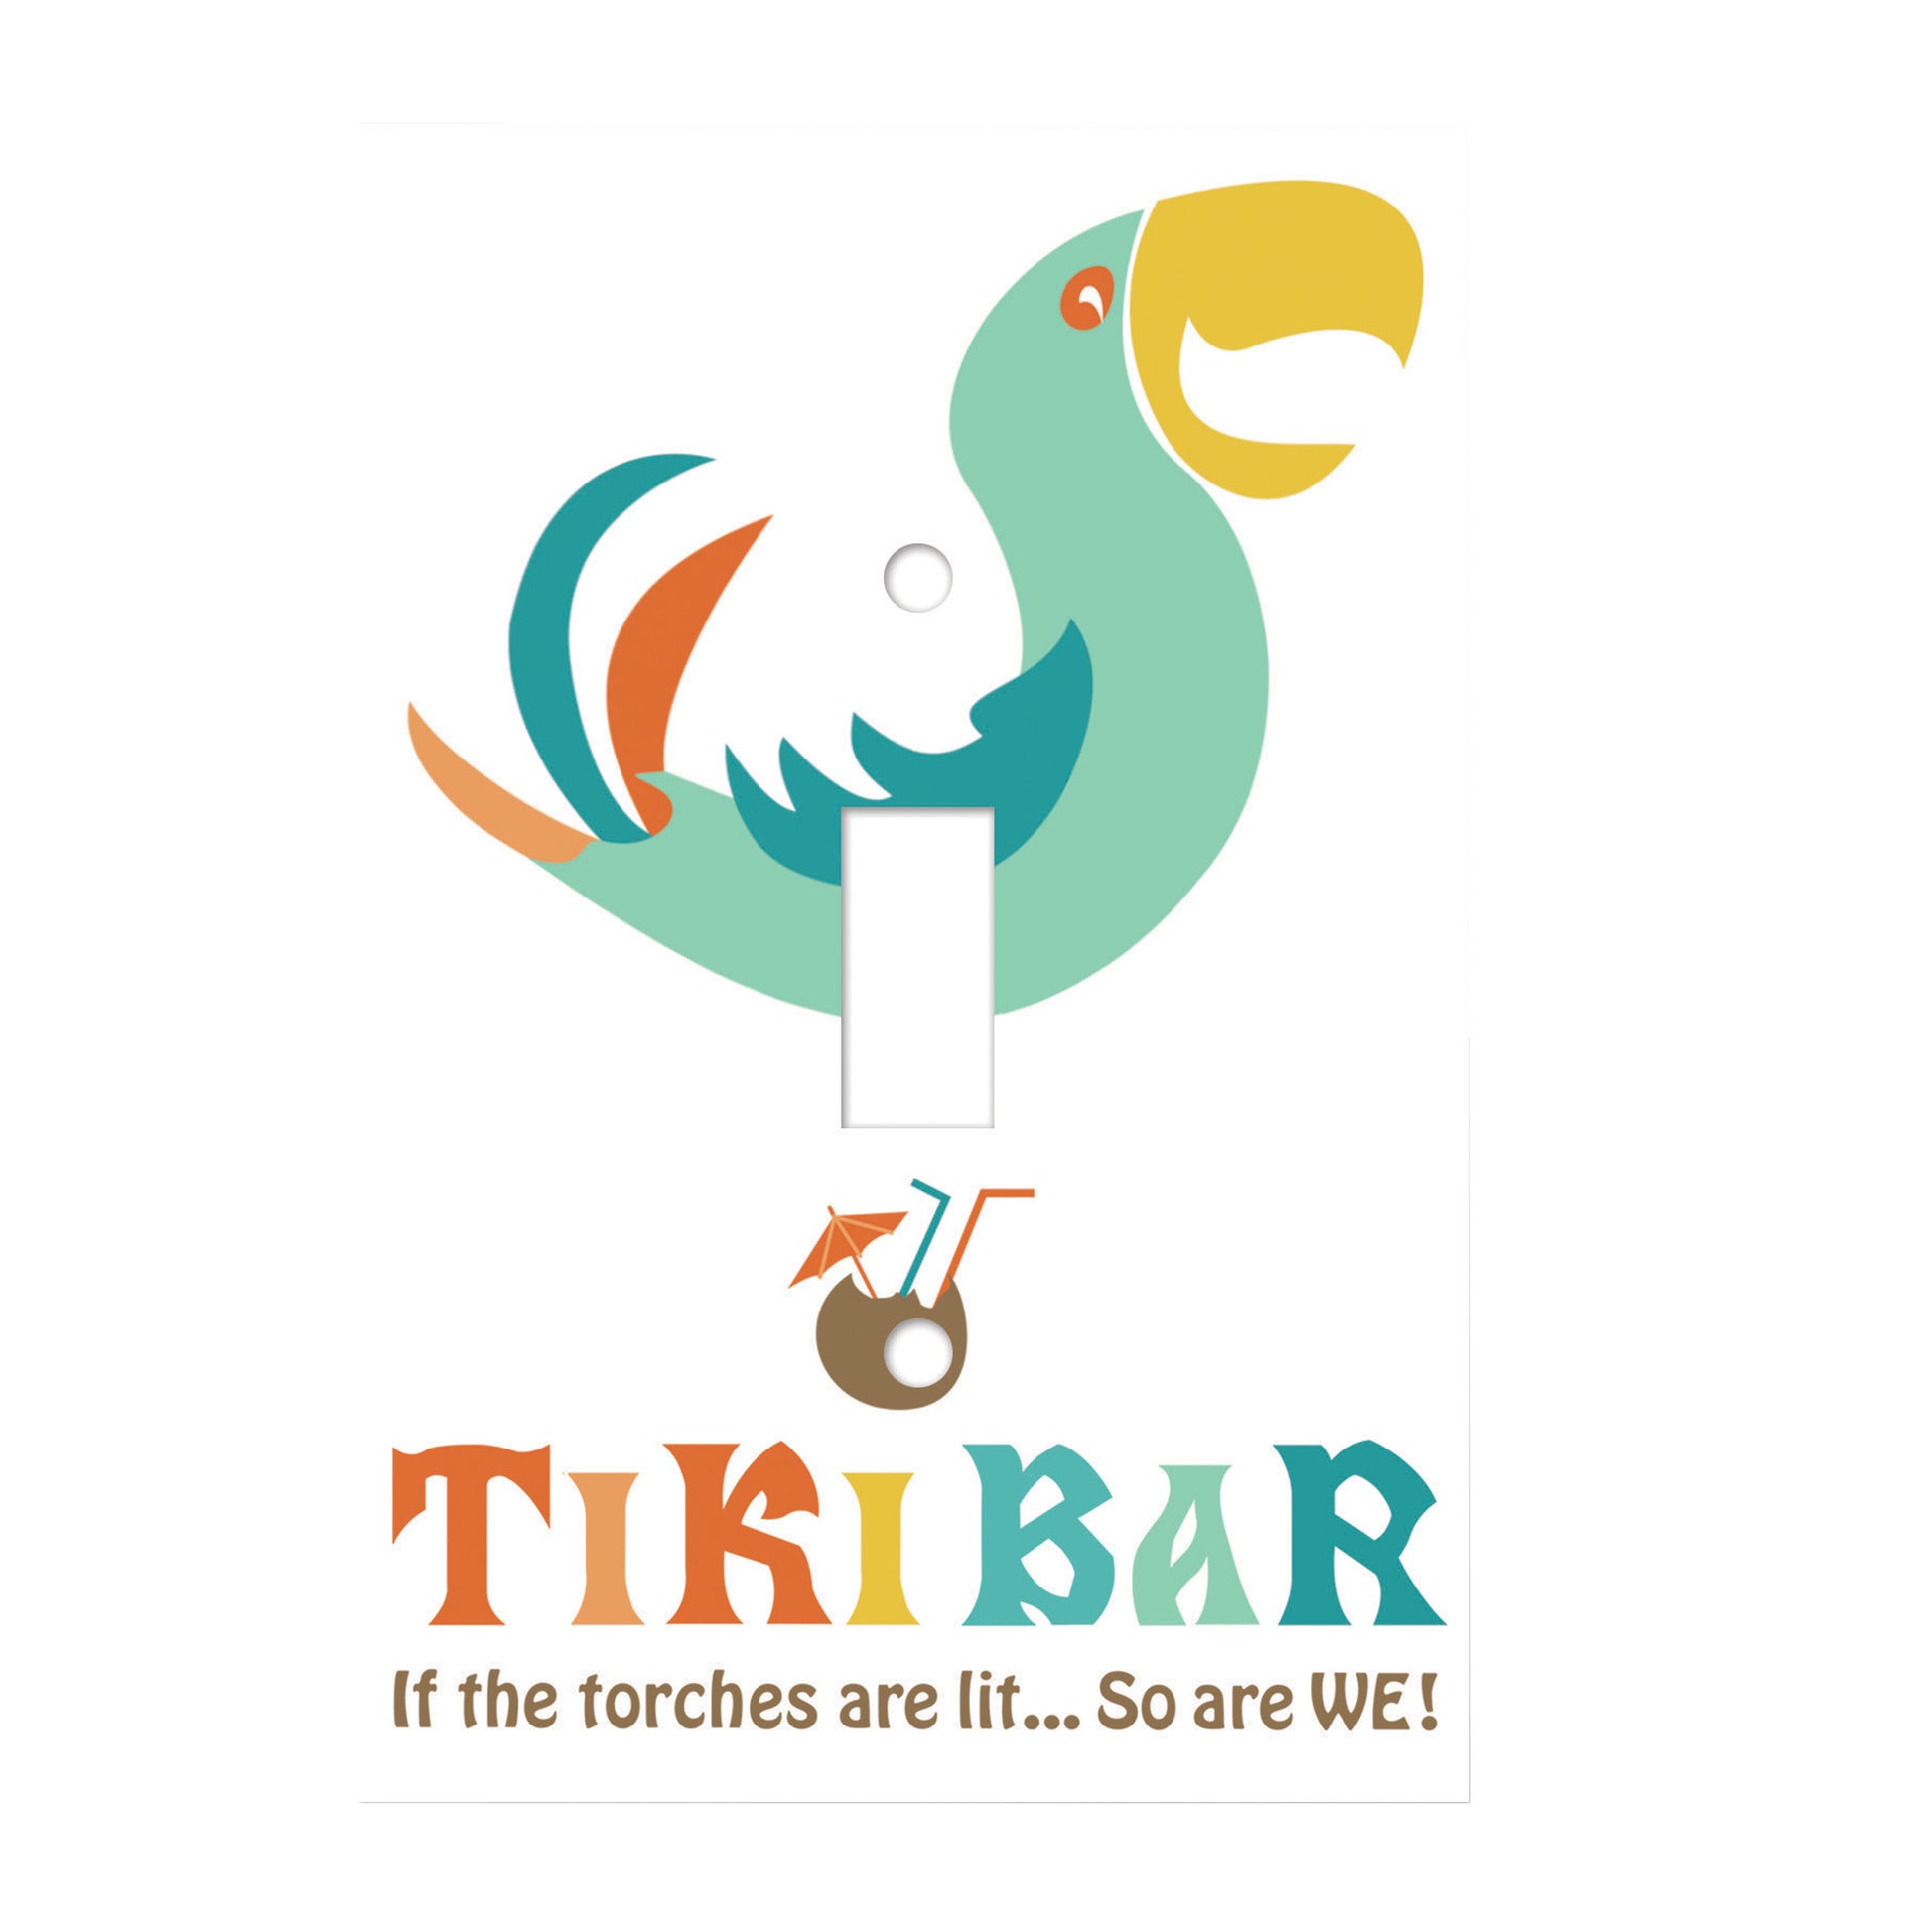 ceramic single toggle switch plate featuring a print of a colorful parrot above a coconut drinking vessel with embellishments and text that reads "tiki bar, if the torches are lit...so are we!"